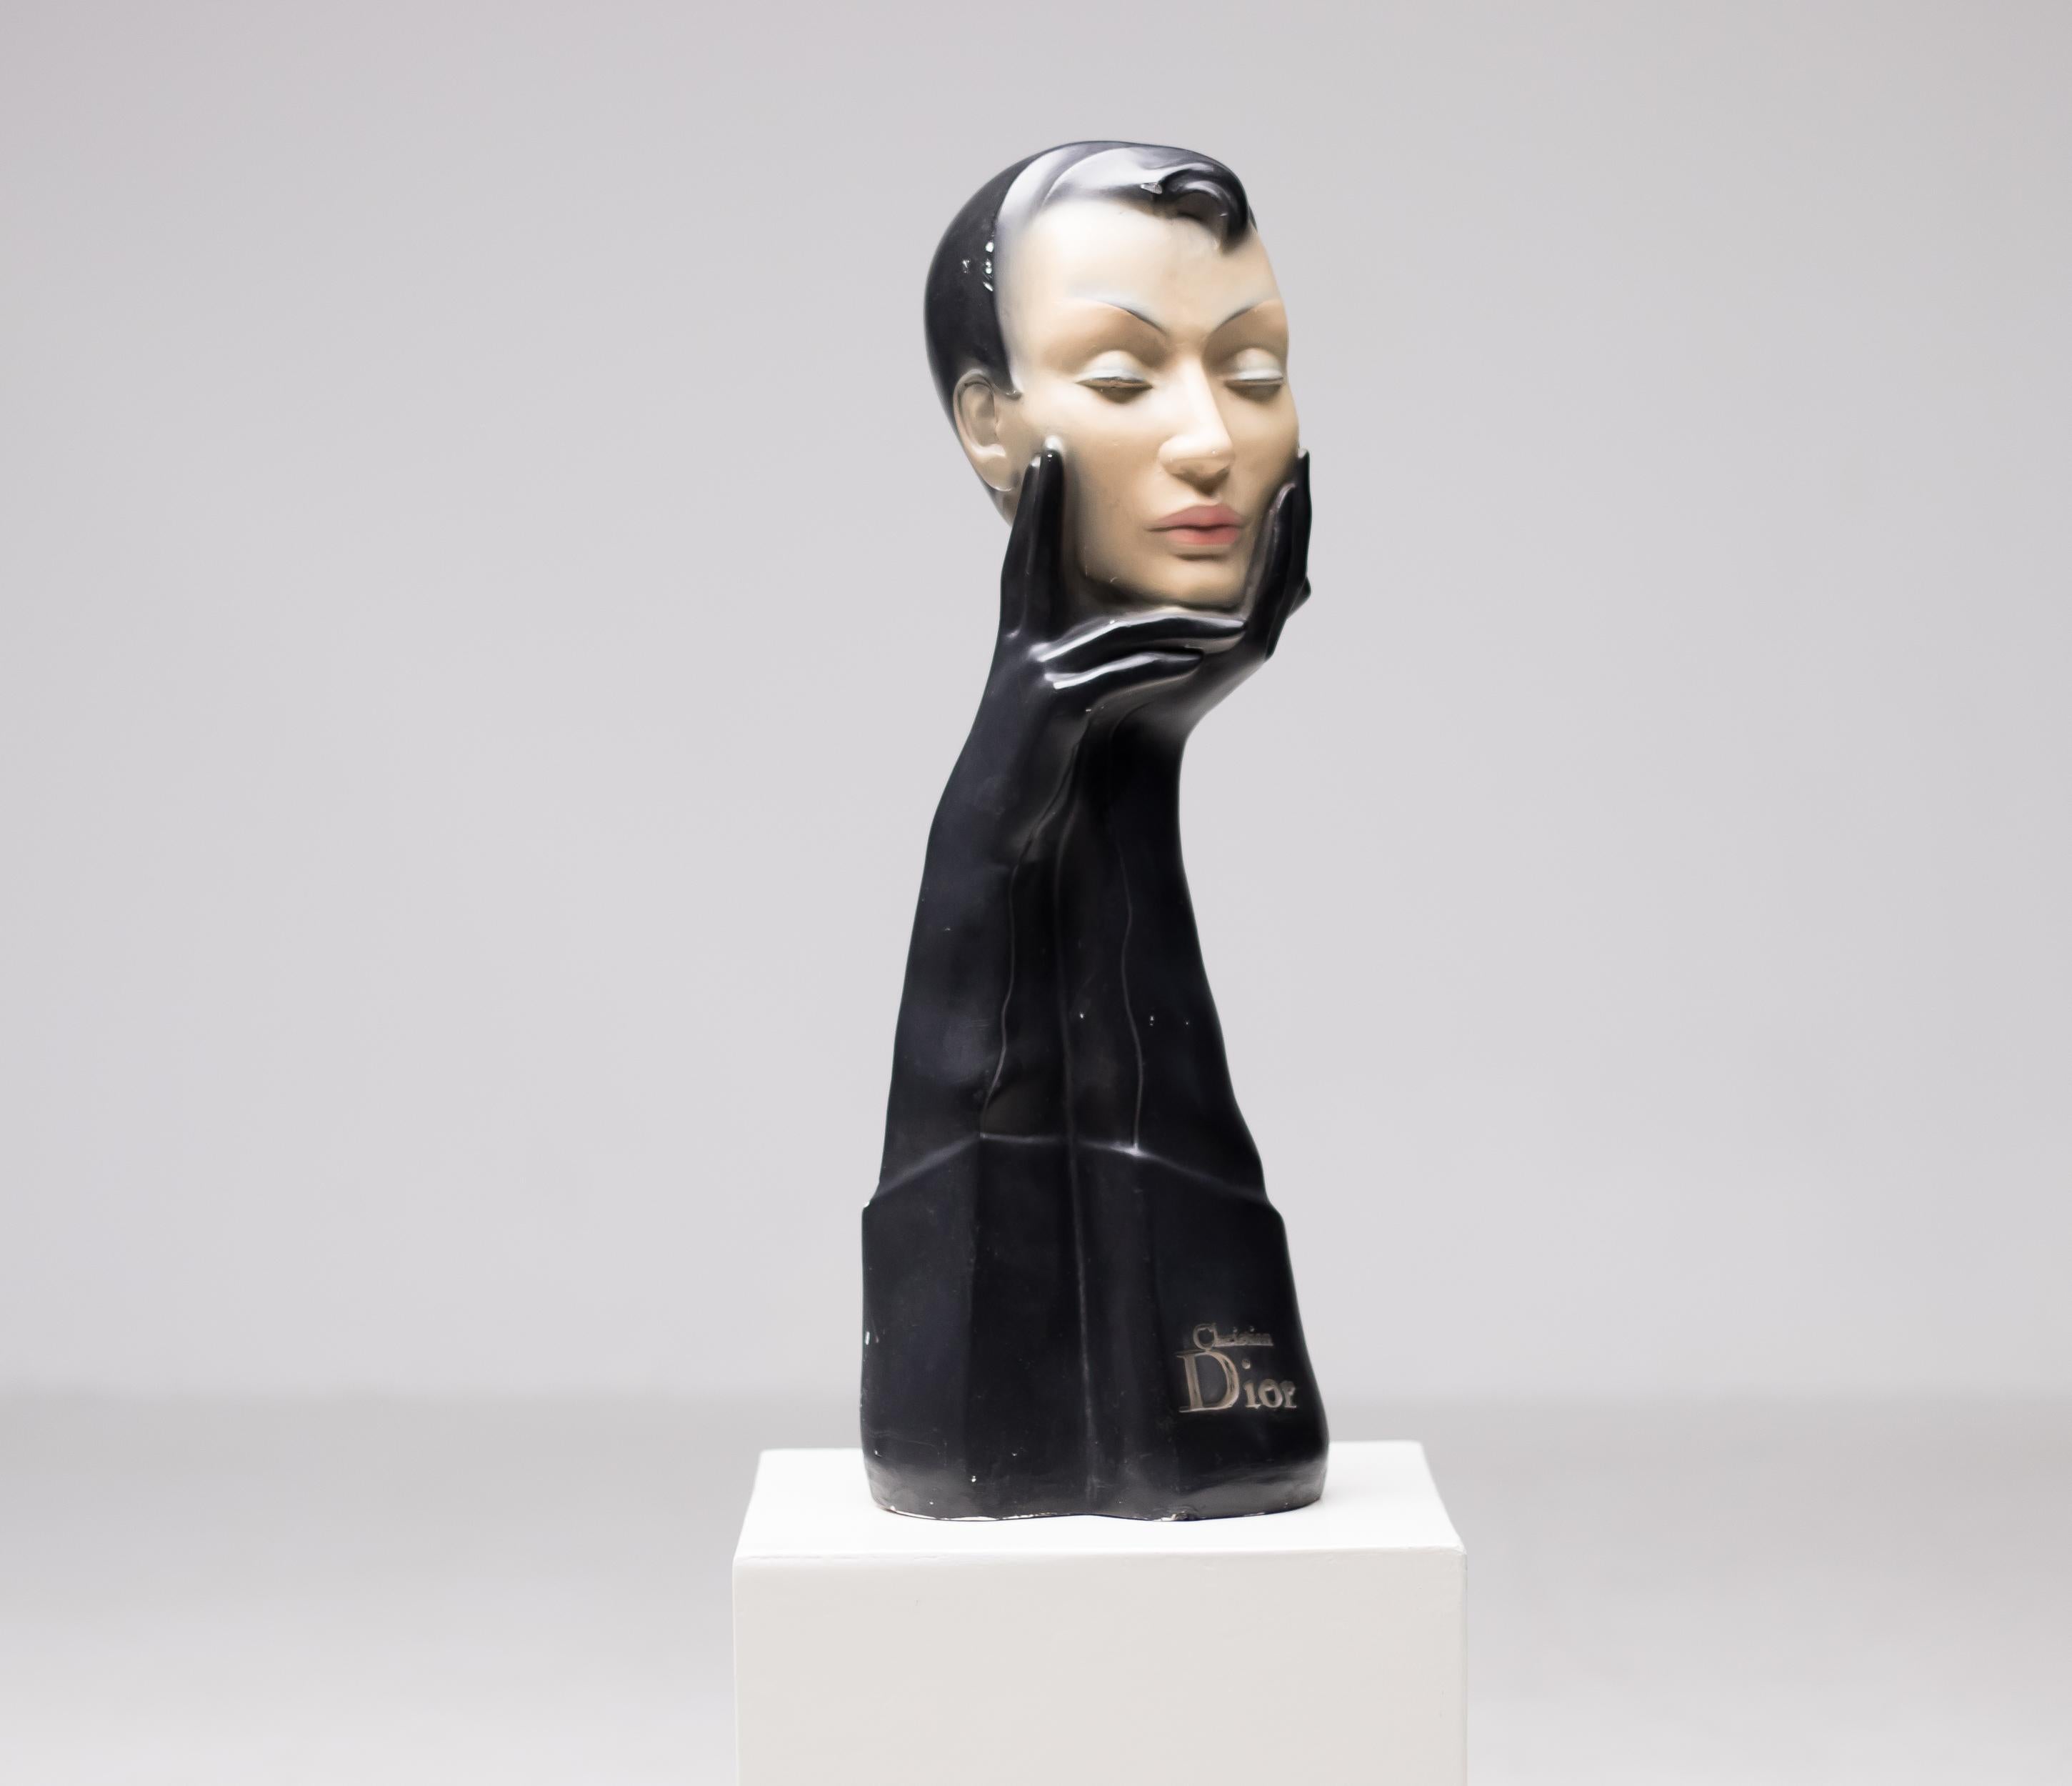 Christian Dior gloved mannequin head. Designed to display glasses, scarves or hats, by Christian Dior in the 1950s. This mannequin was made by the Gemini Company. Signed Christian Dior. A piece of Art Deco chic and elegance, this mannequin is made